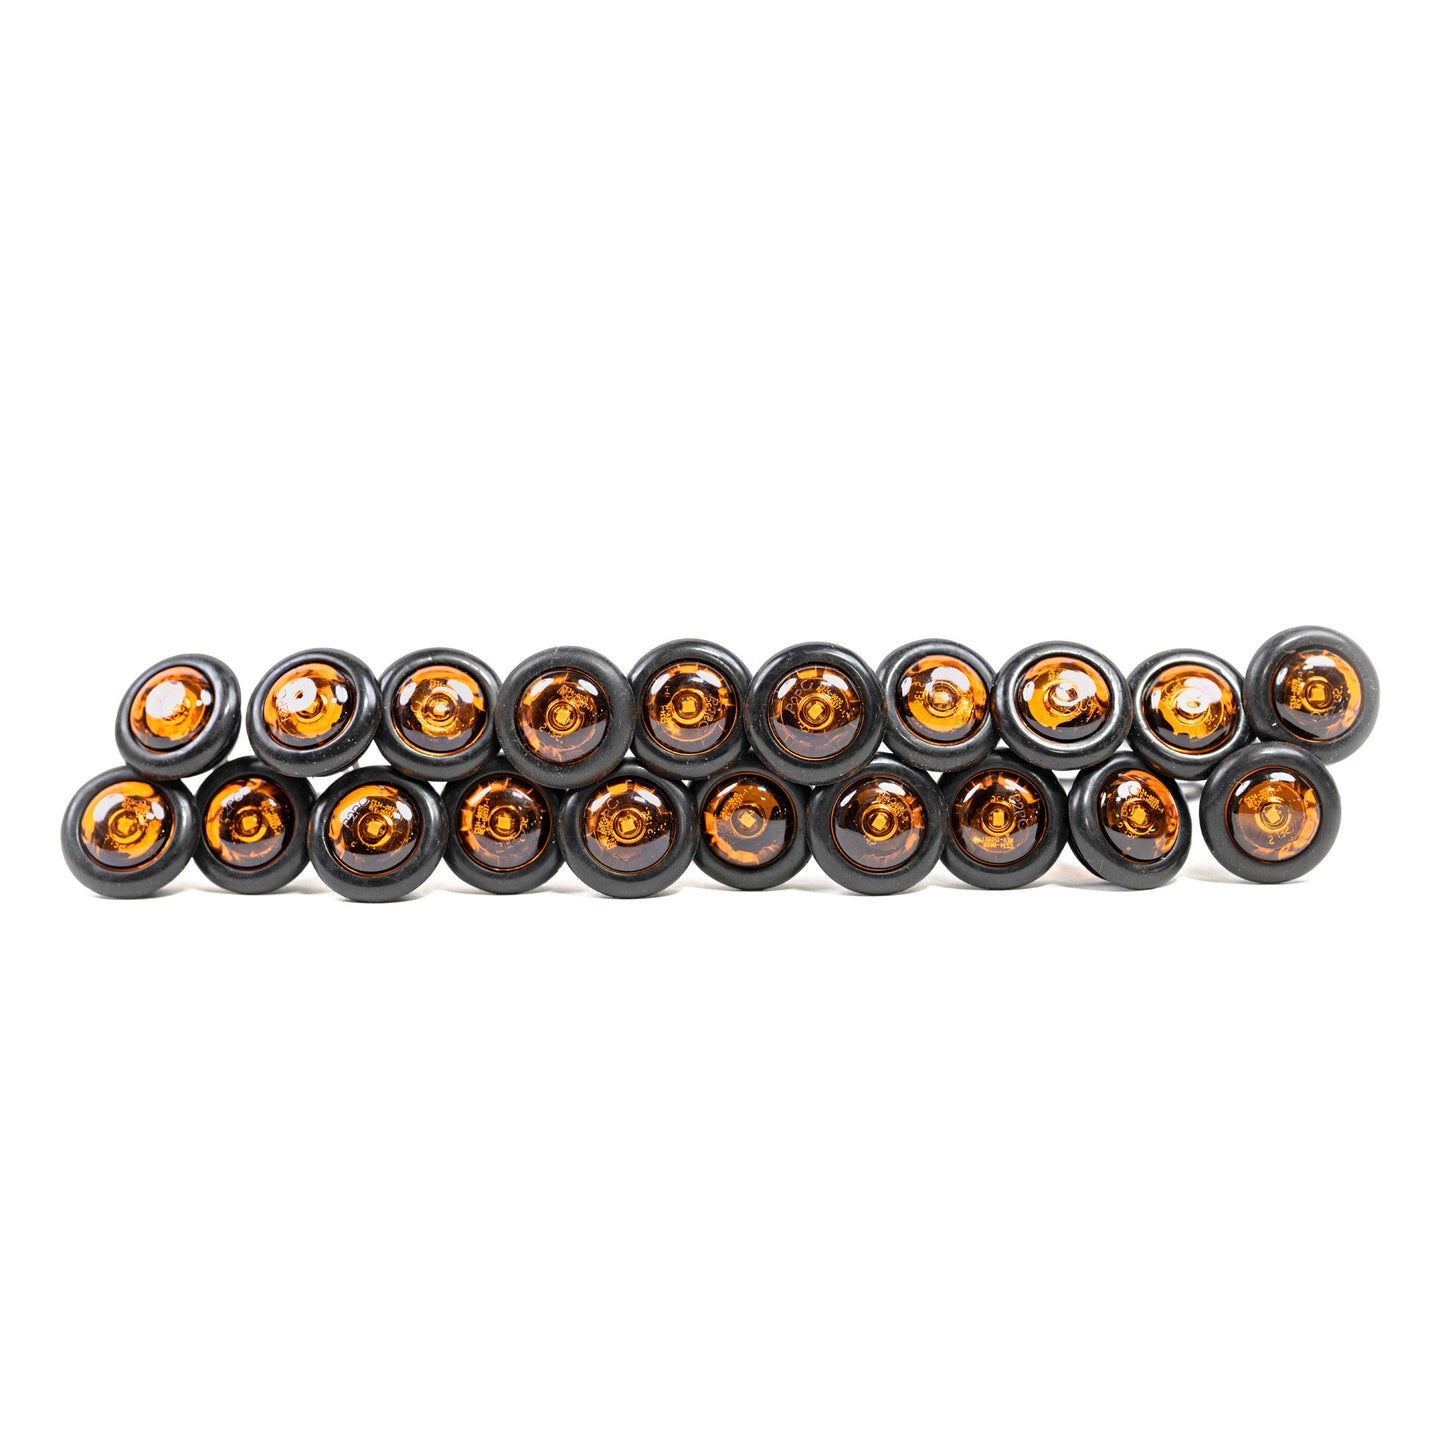 Amber PC/P2 Rated 3/4" Miniature Side Marker